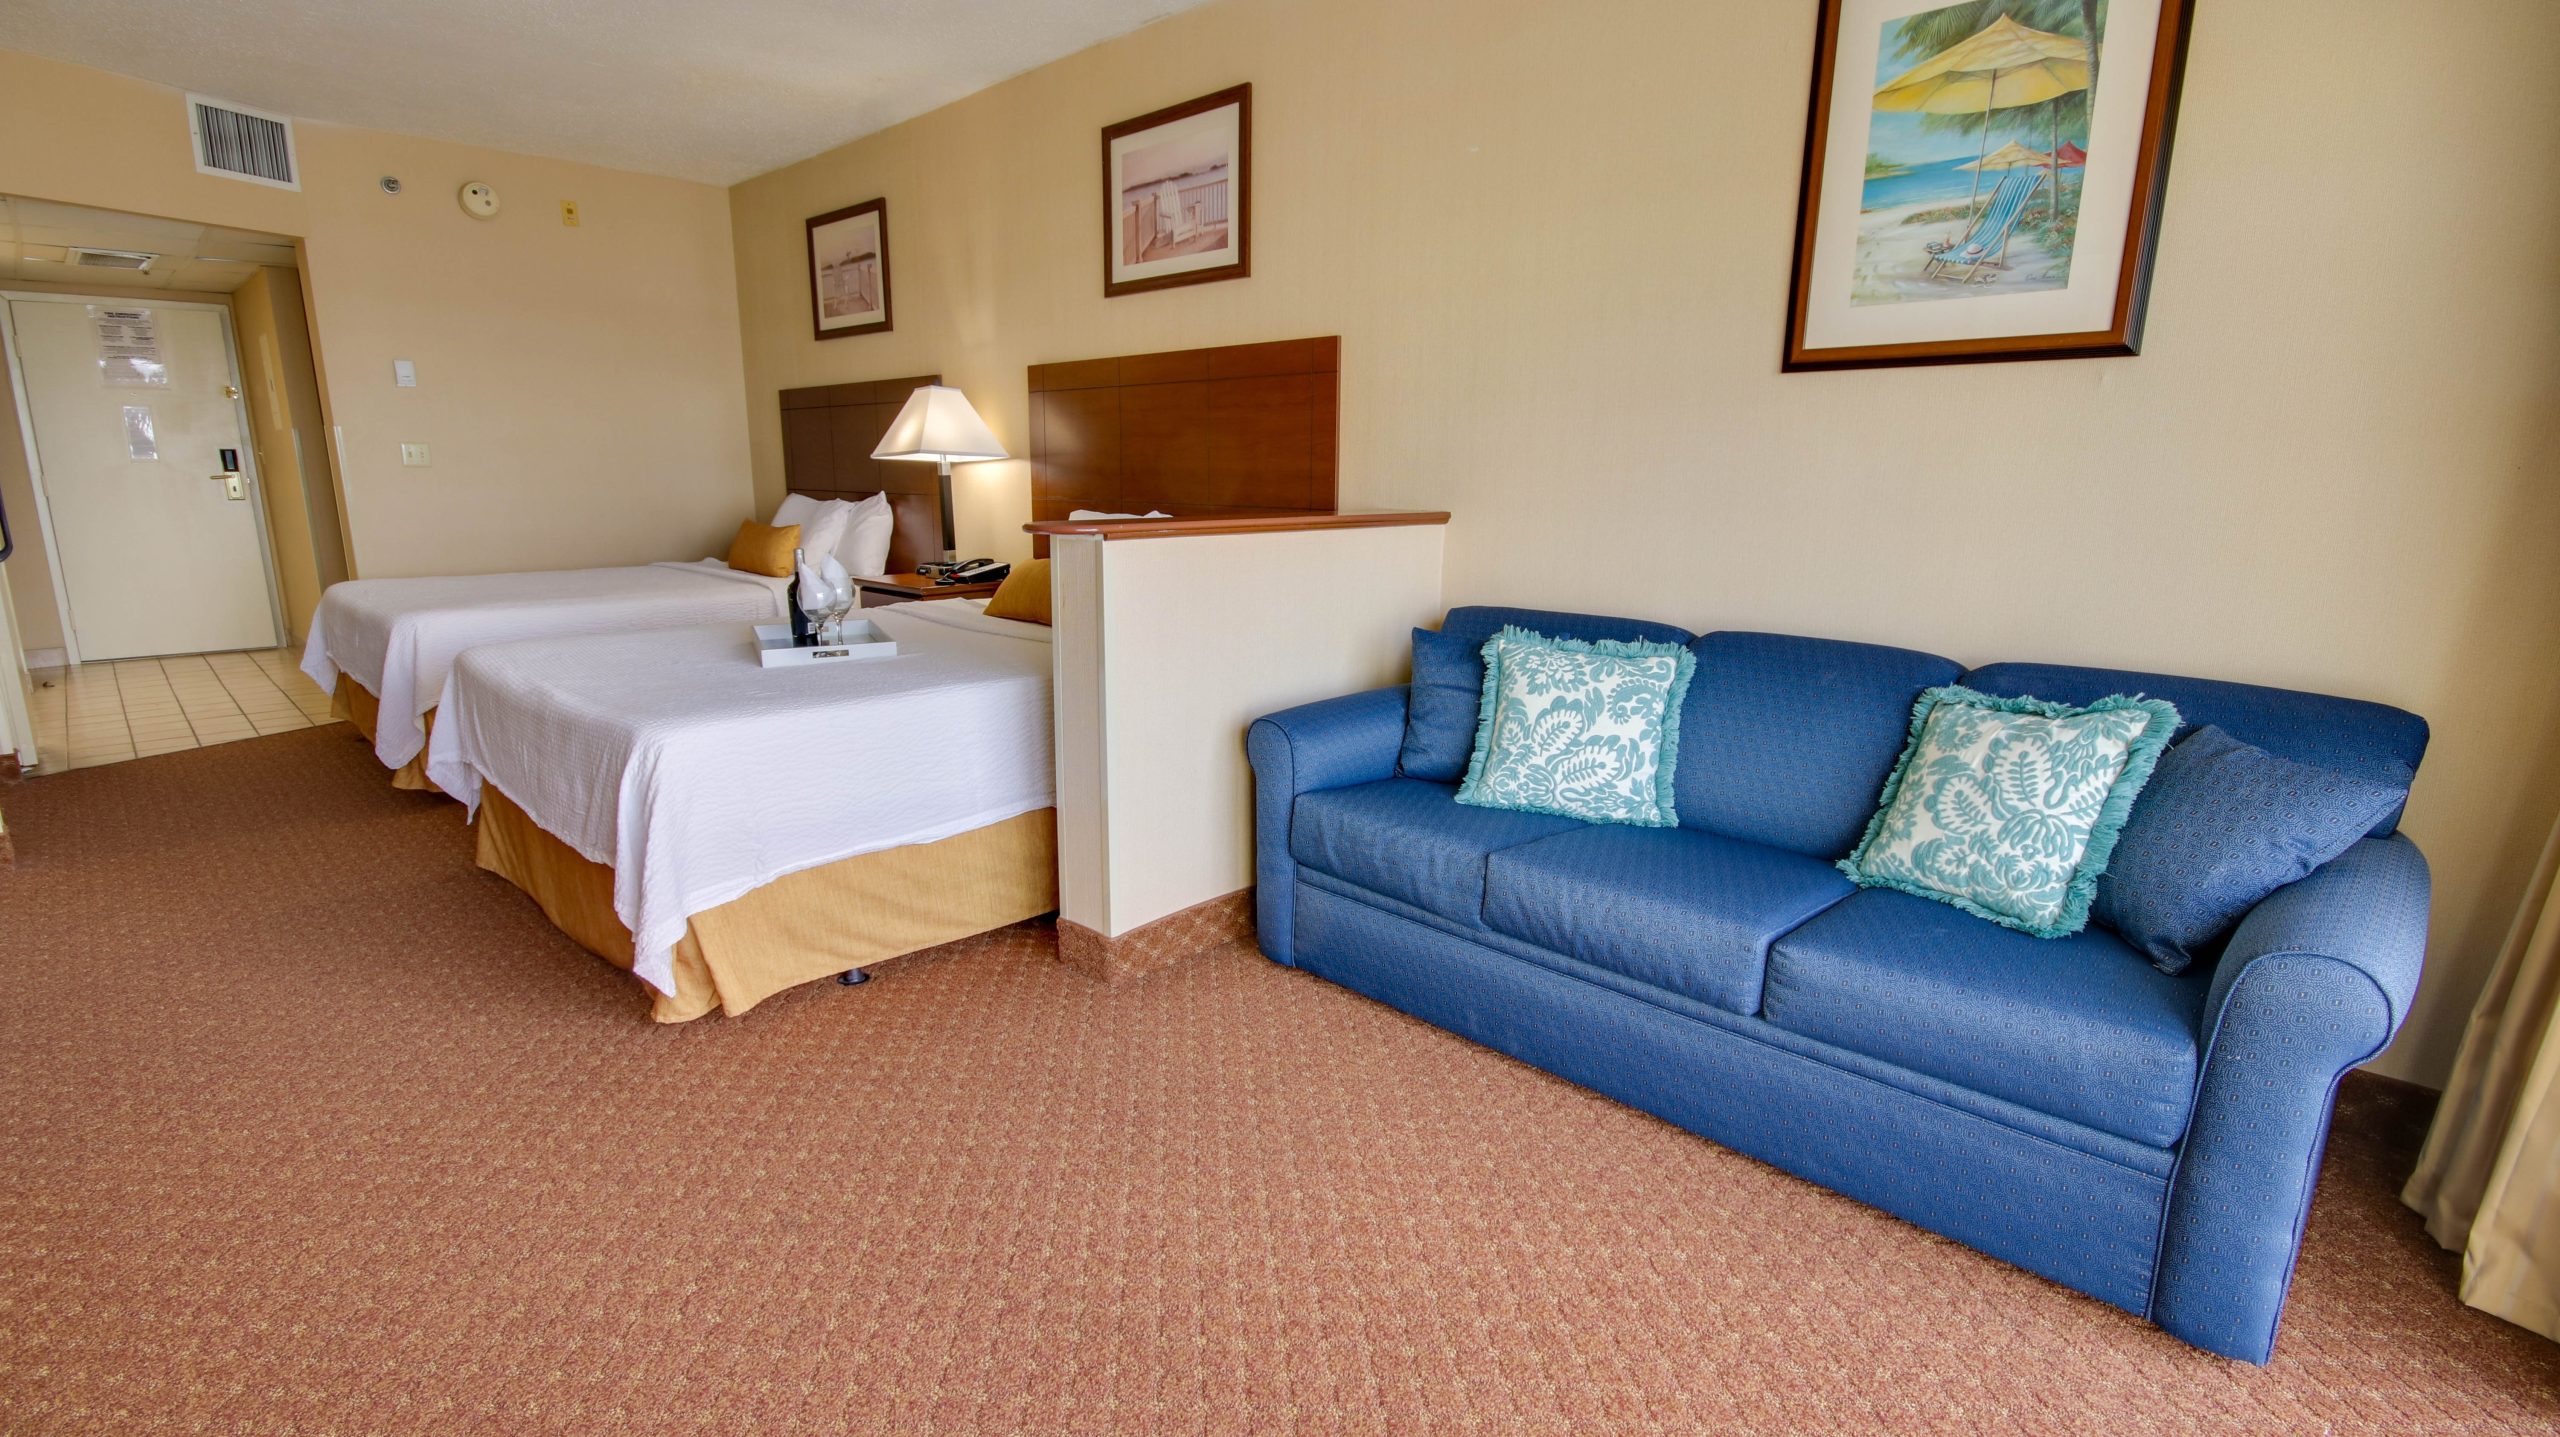 A hotel room with two double beds and a blue coach